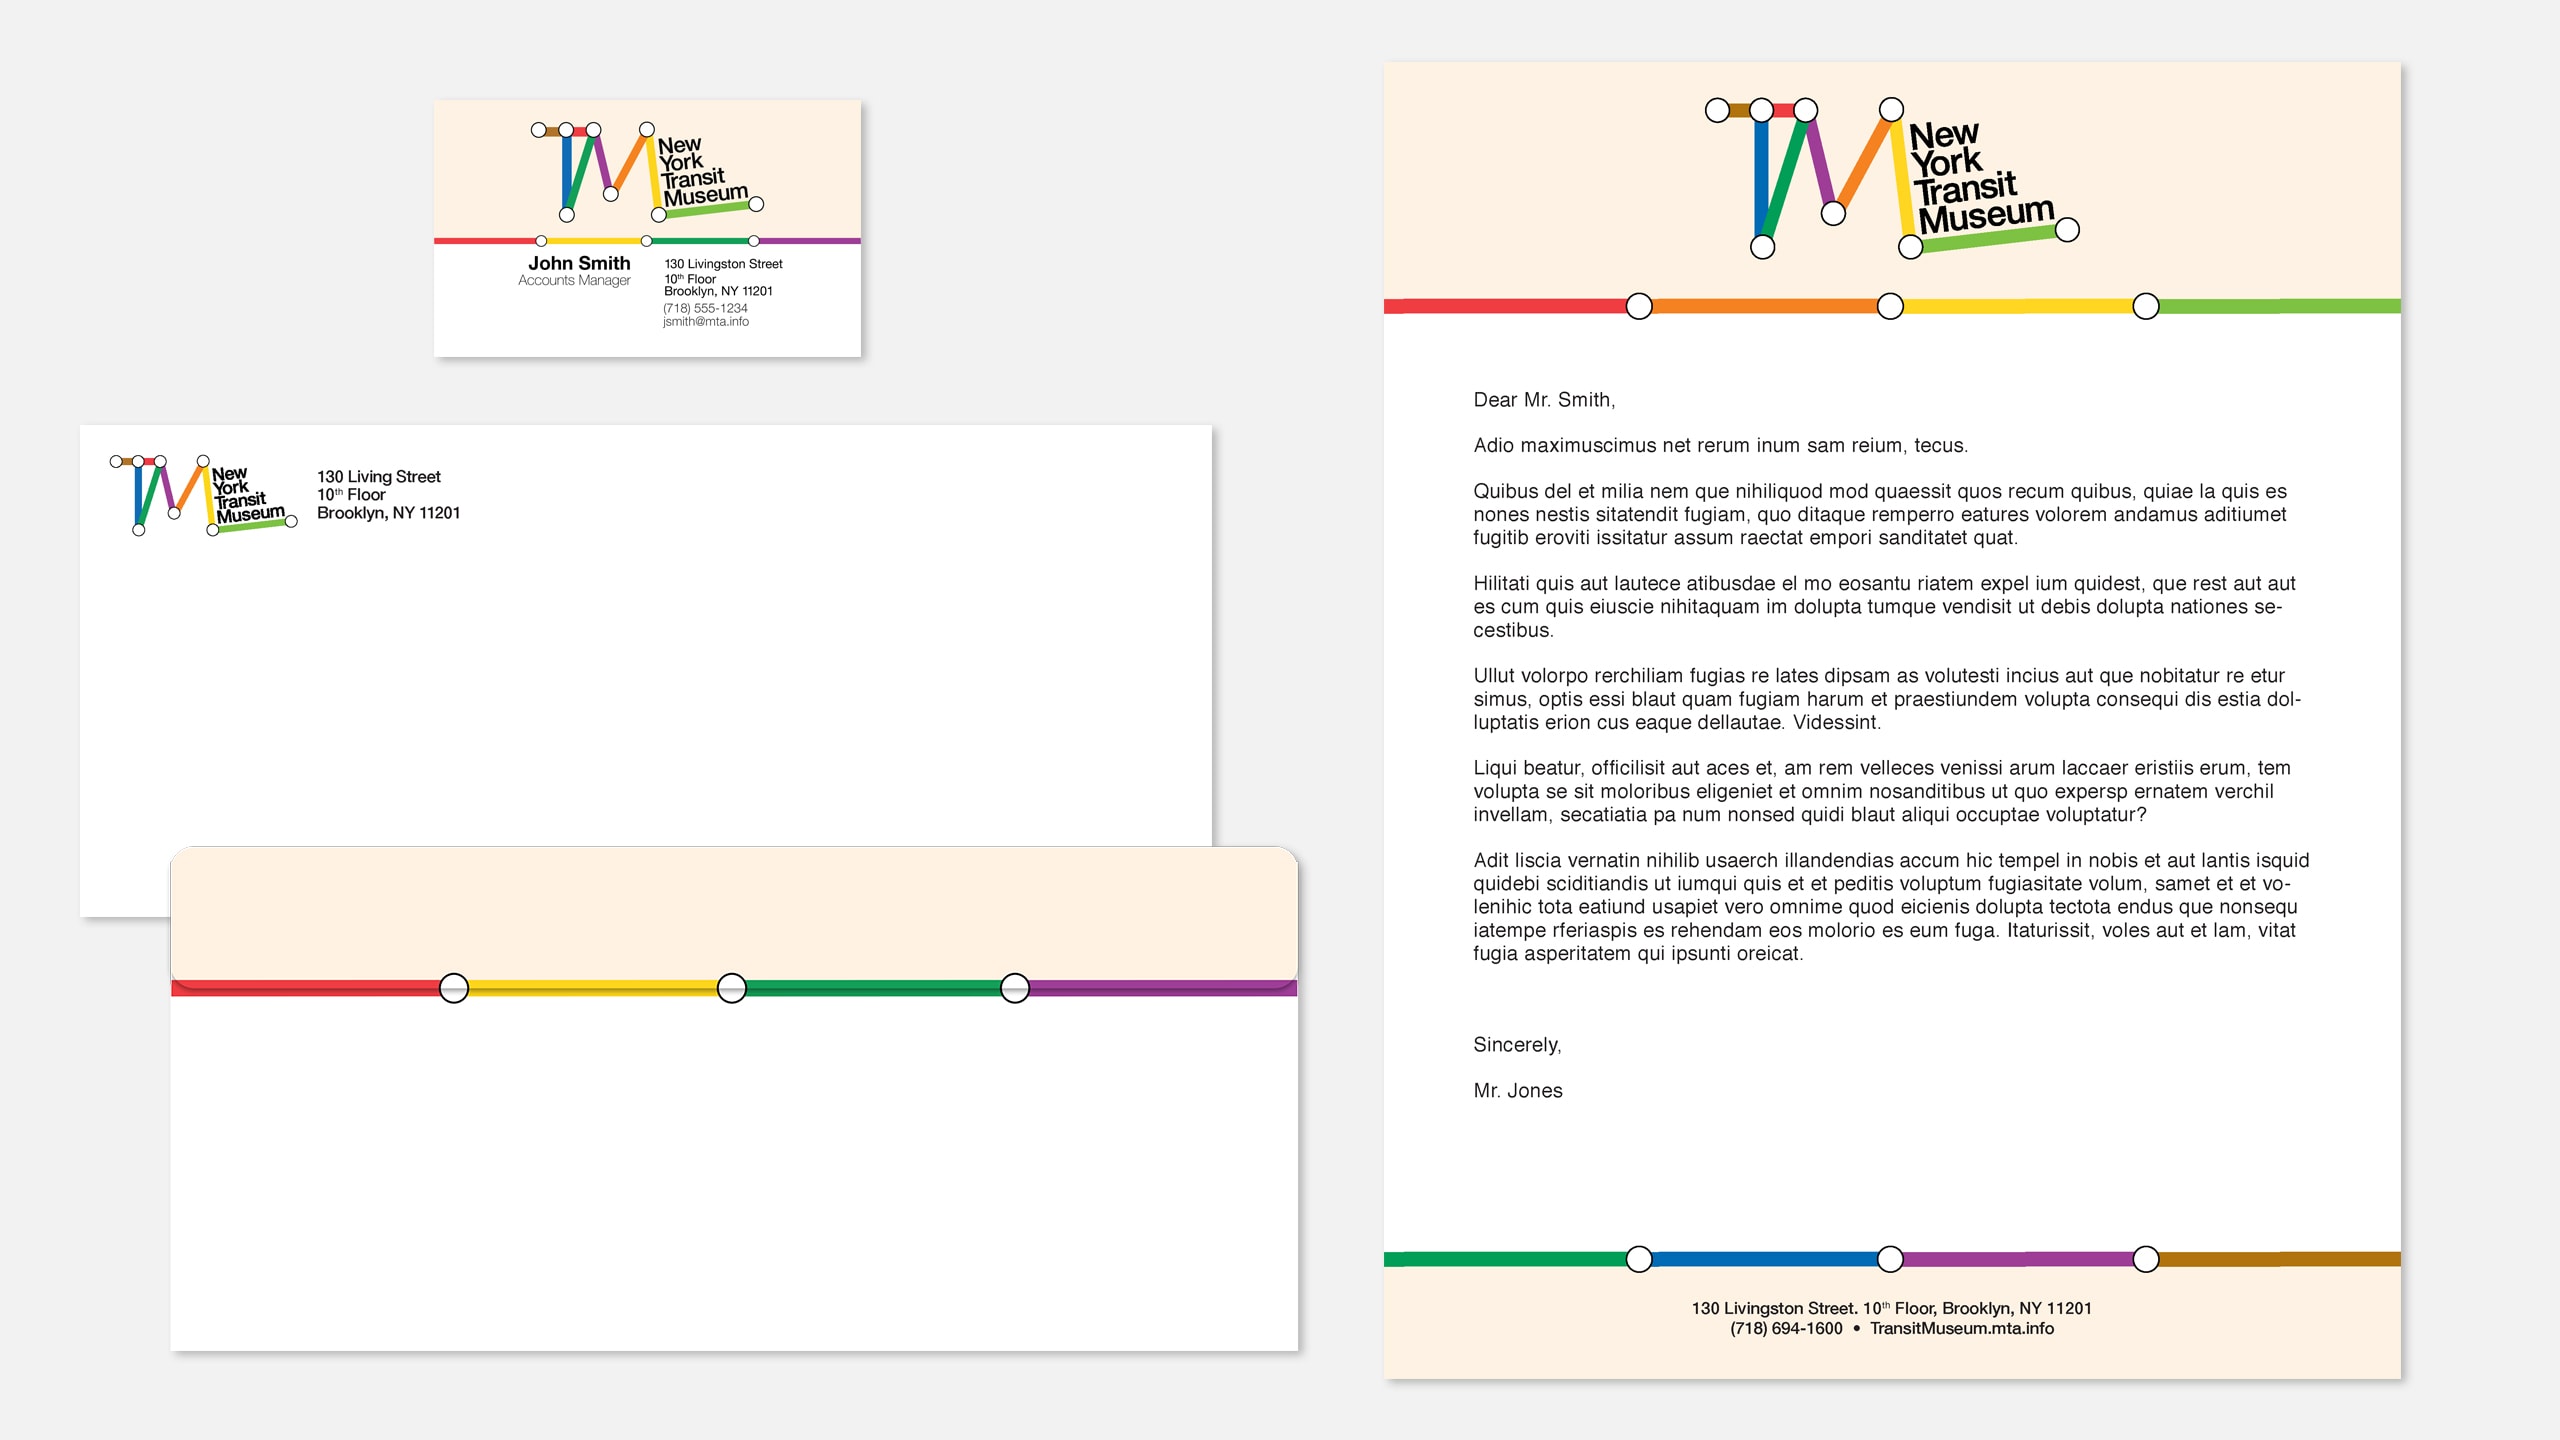 Mockup of a Transit Museum business card, envelope, and letterhead